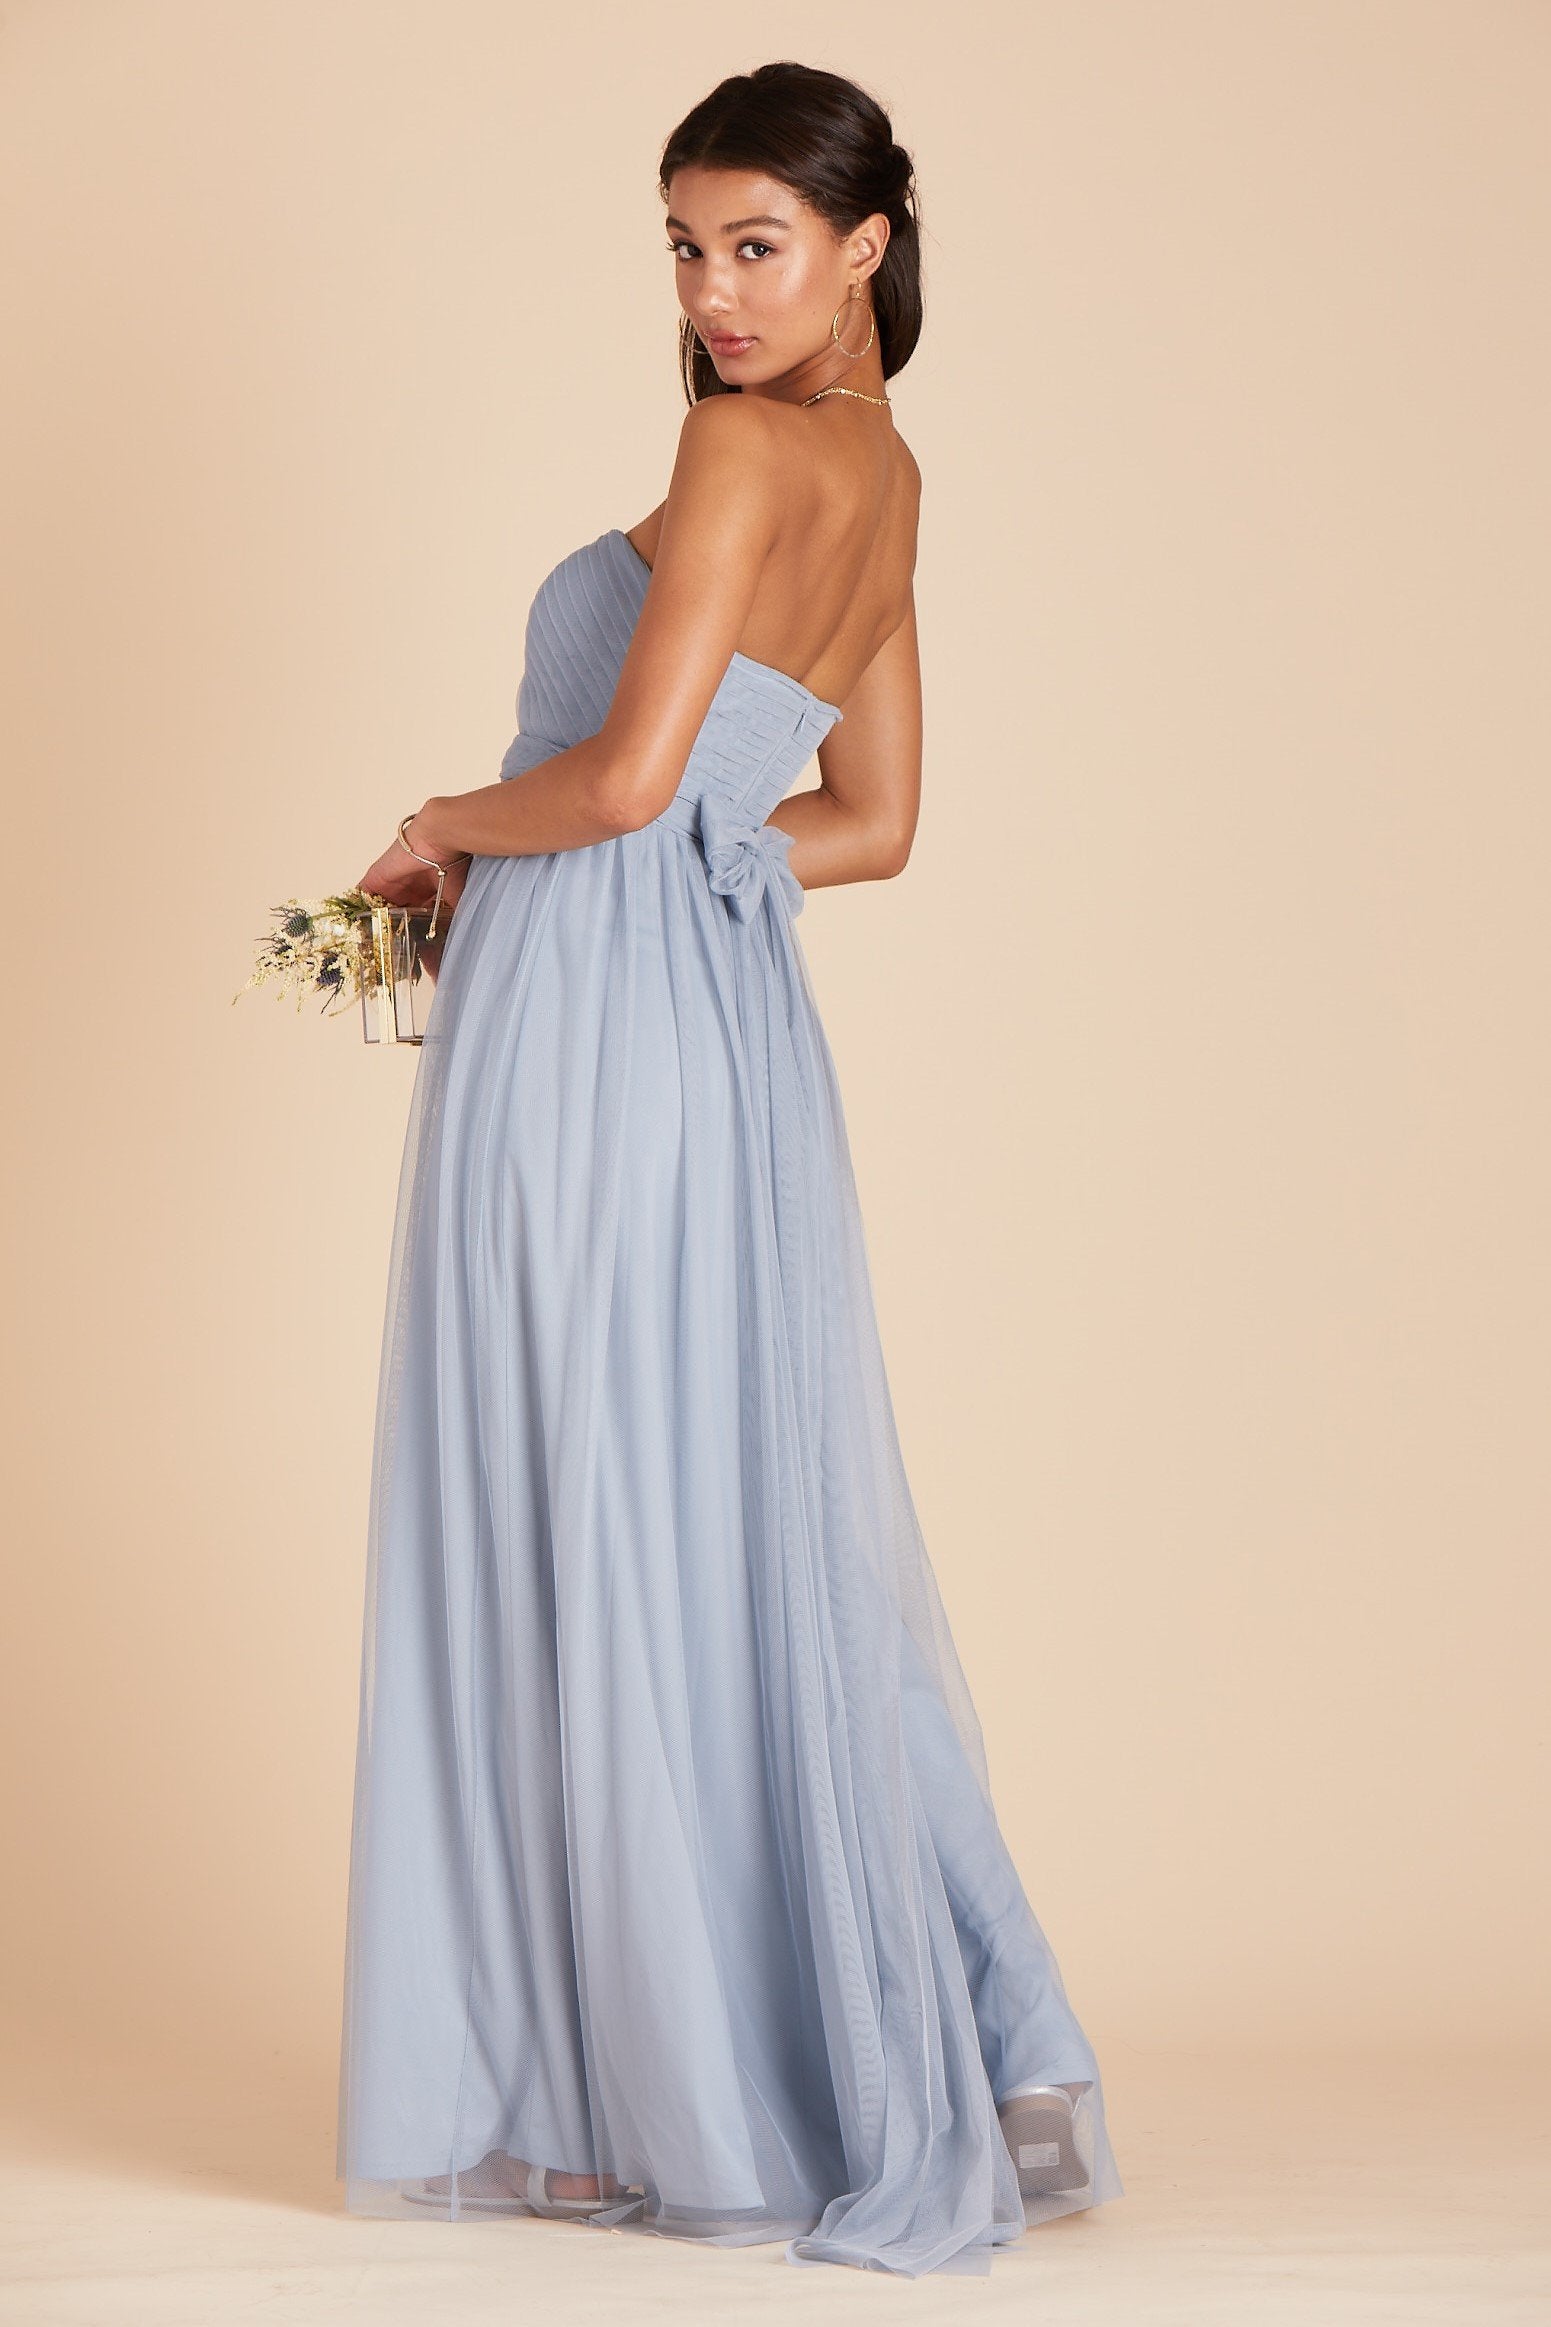 Christina convertible bridesmaid dress in dusty blue tulle by Birdy Grey, side view